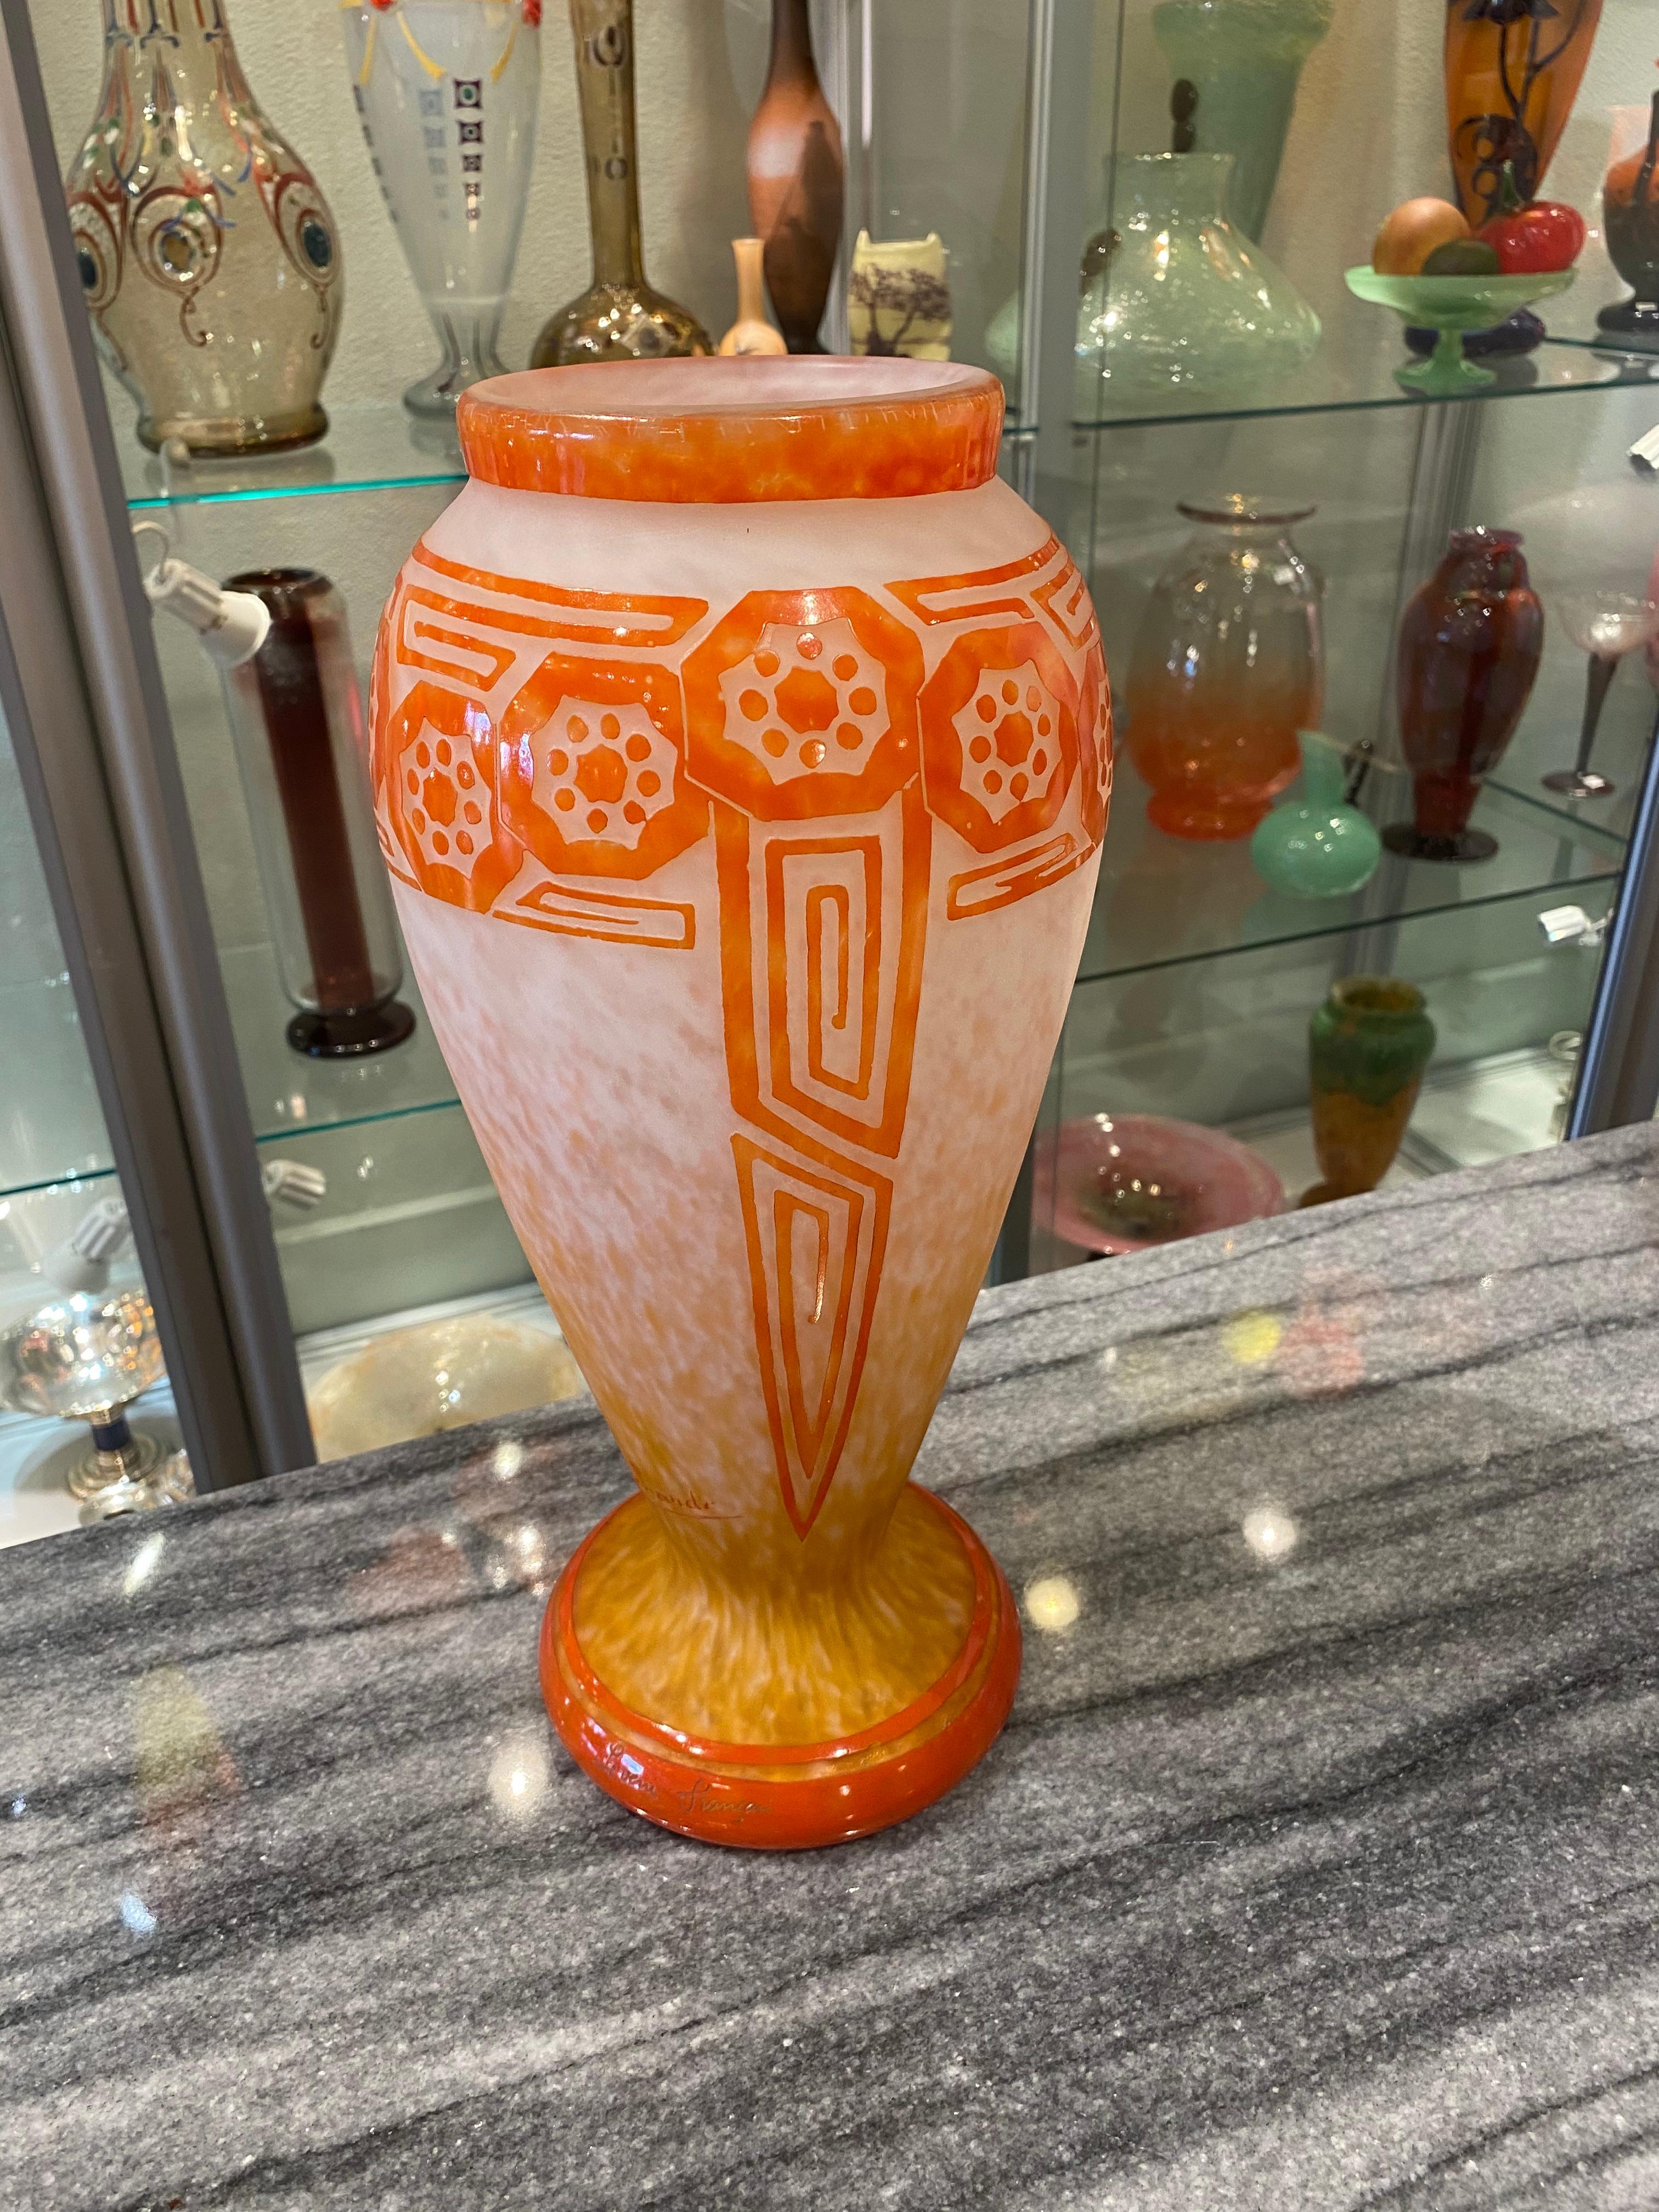 A glass vase from the Deco serie of Le Verre Français.  This vase has a White Opalescent background with degradé of Orange.  The foot and motif (flowers and geometric pattern) on this vase are in a darker Orange. The patter is